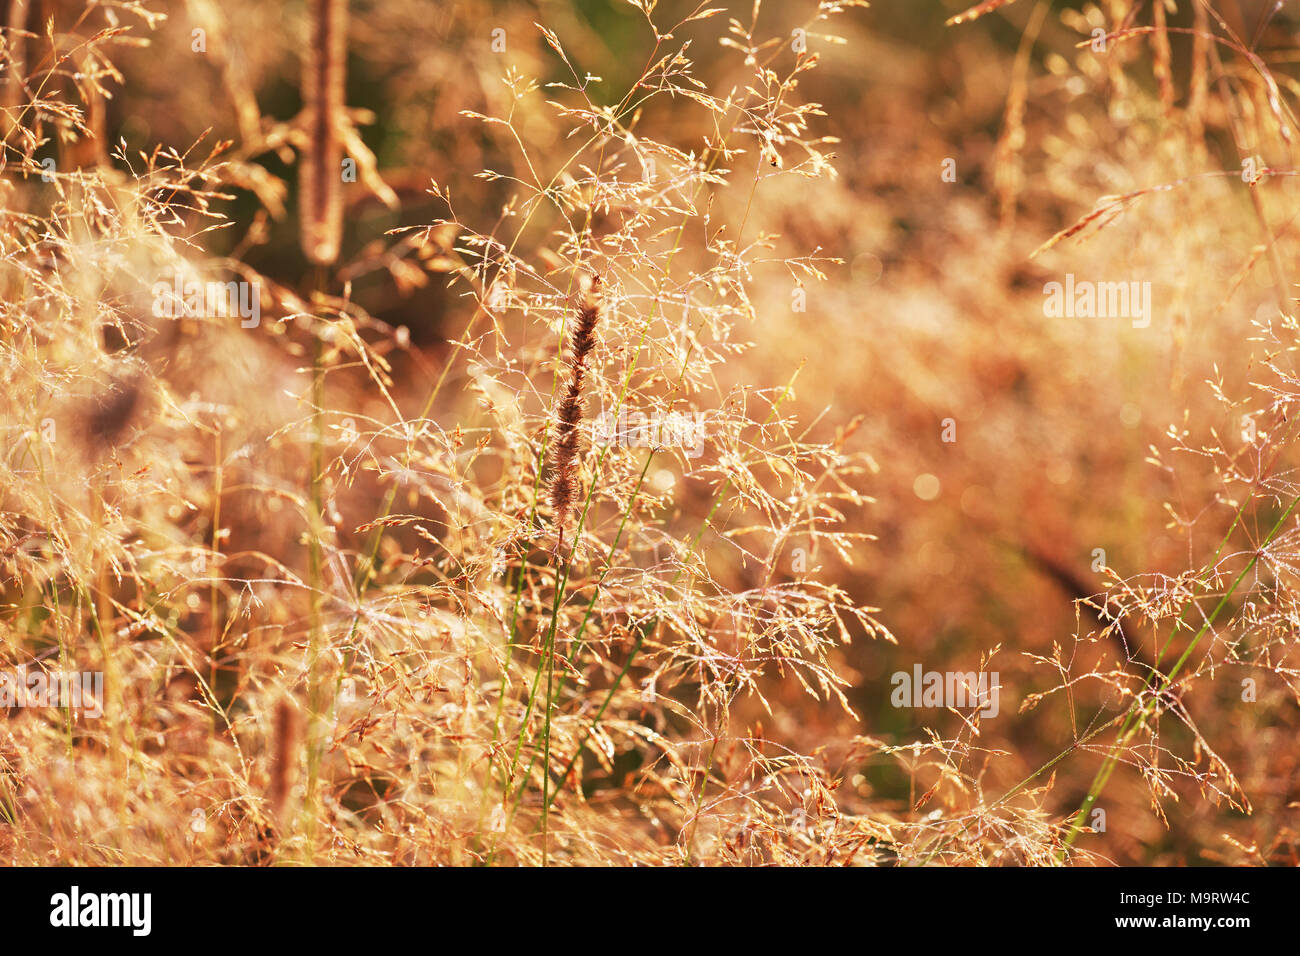 Dry grass fescue (Festuca arundlnacea) at sunrise, selective focus on some of the branches Stock Photo